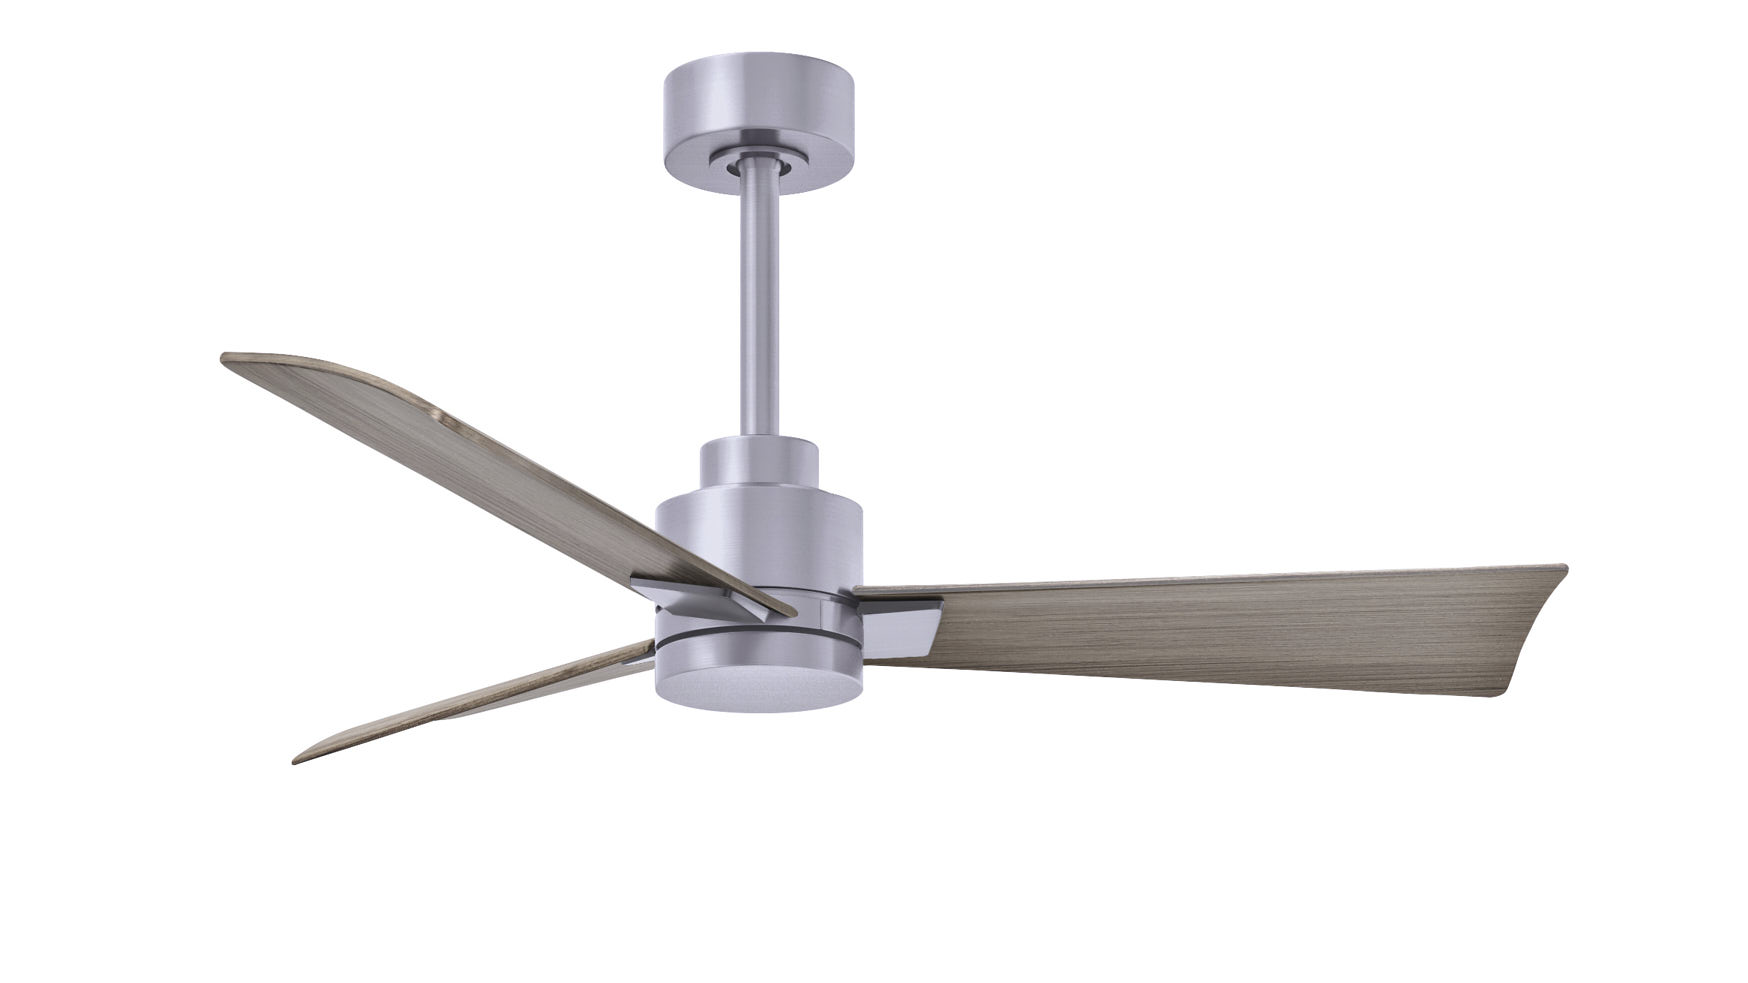 Alessandra ceiling fan in brushed nickel finish with 42